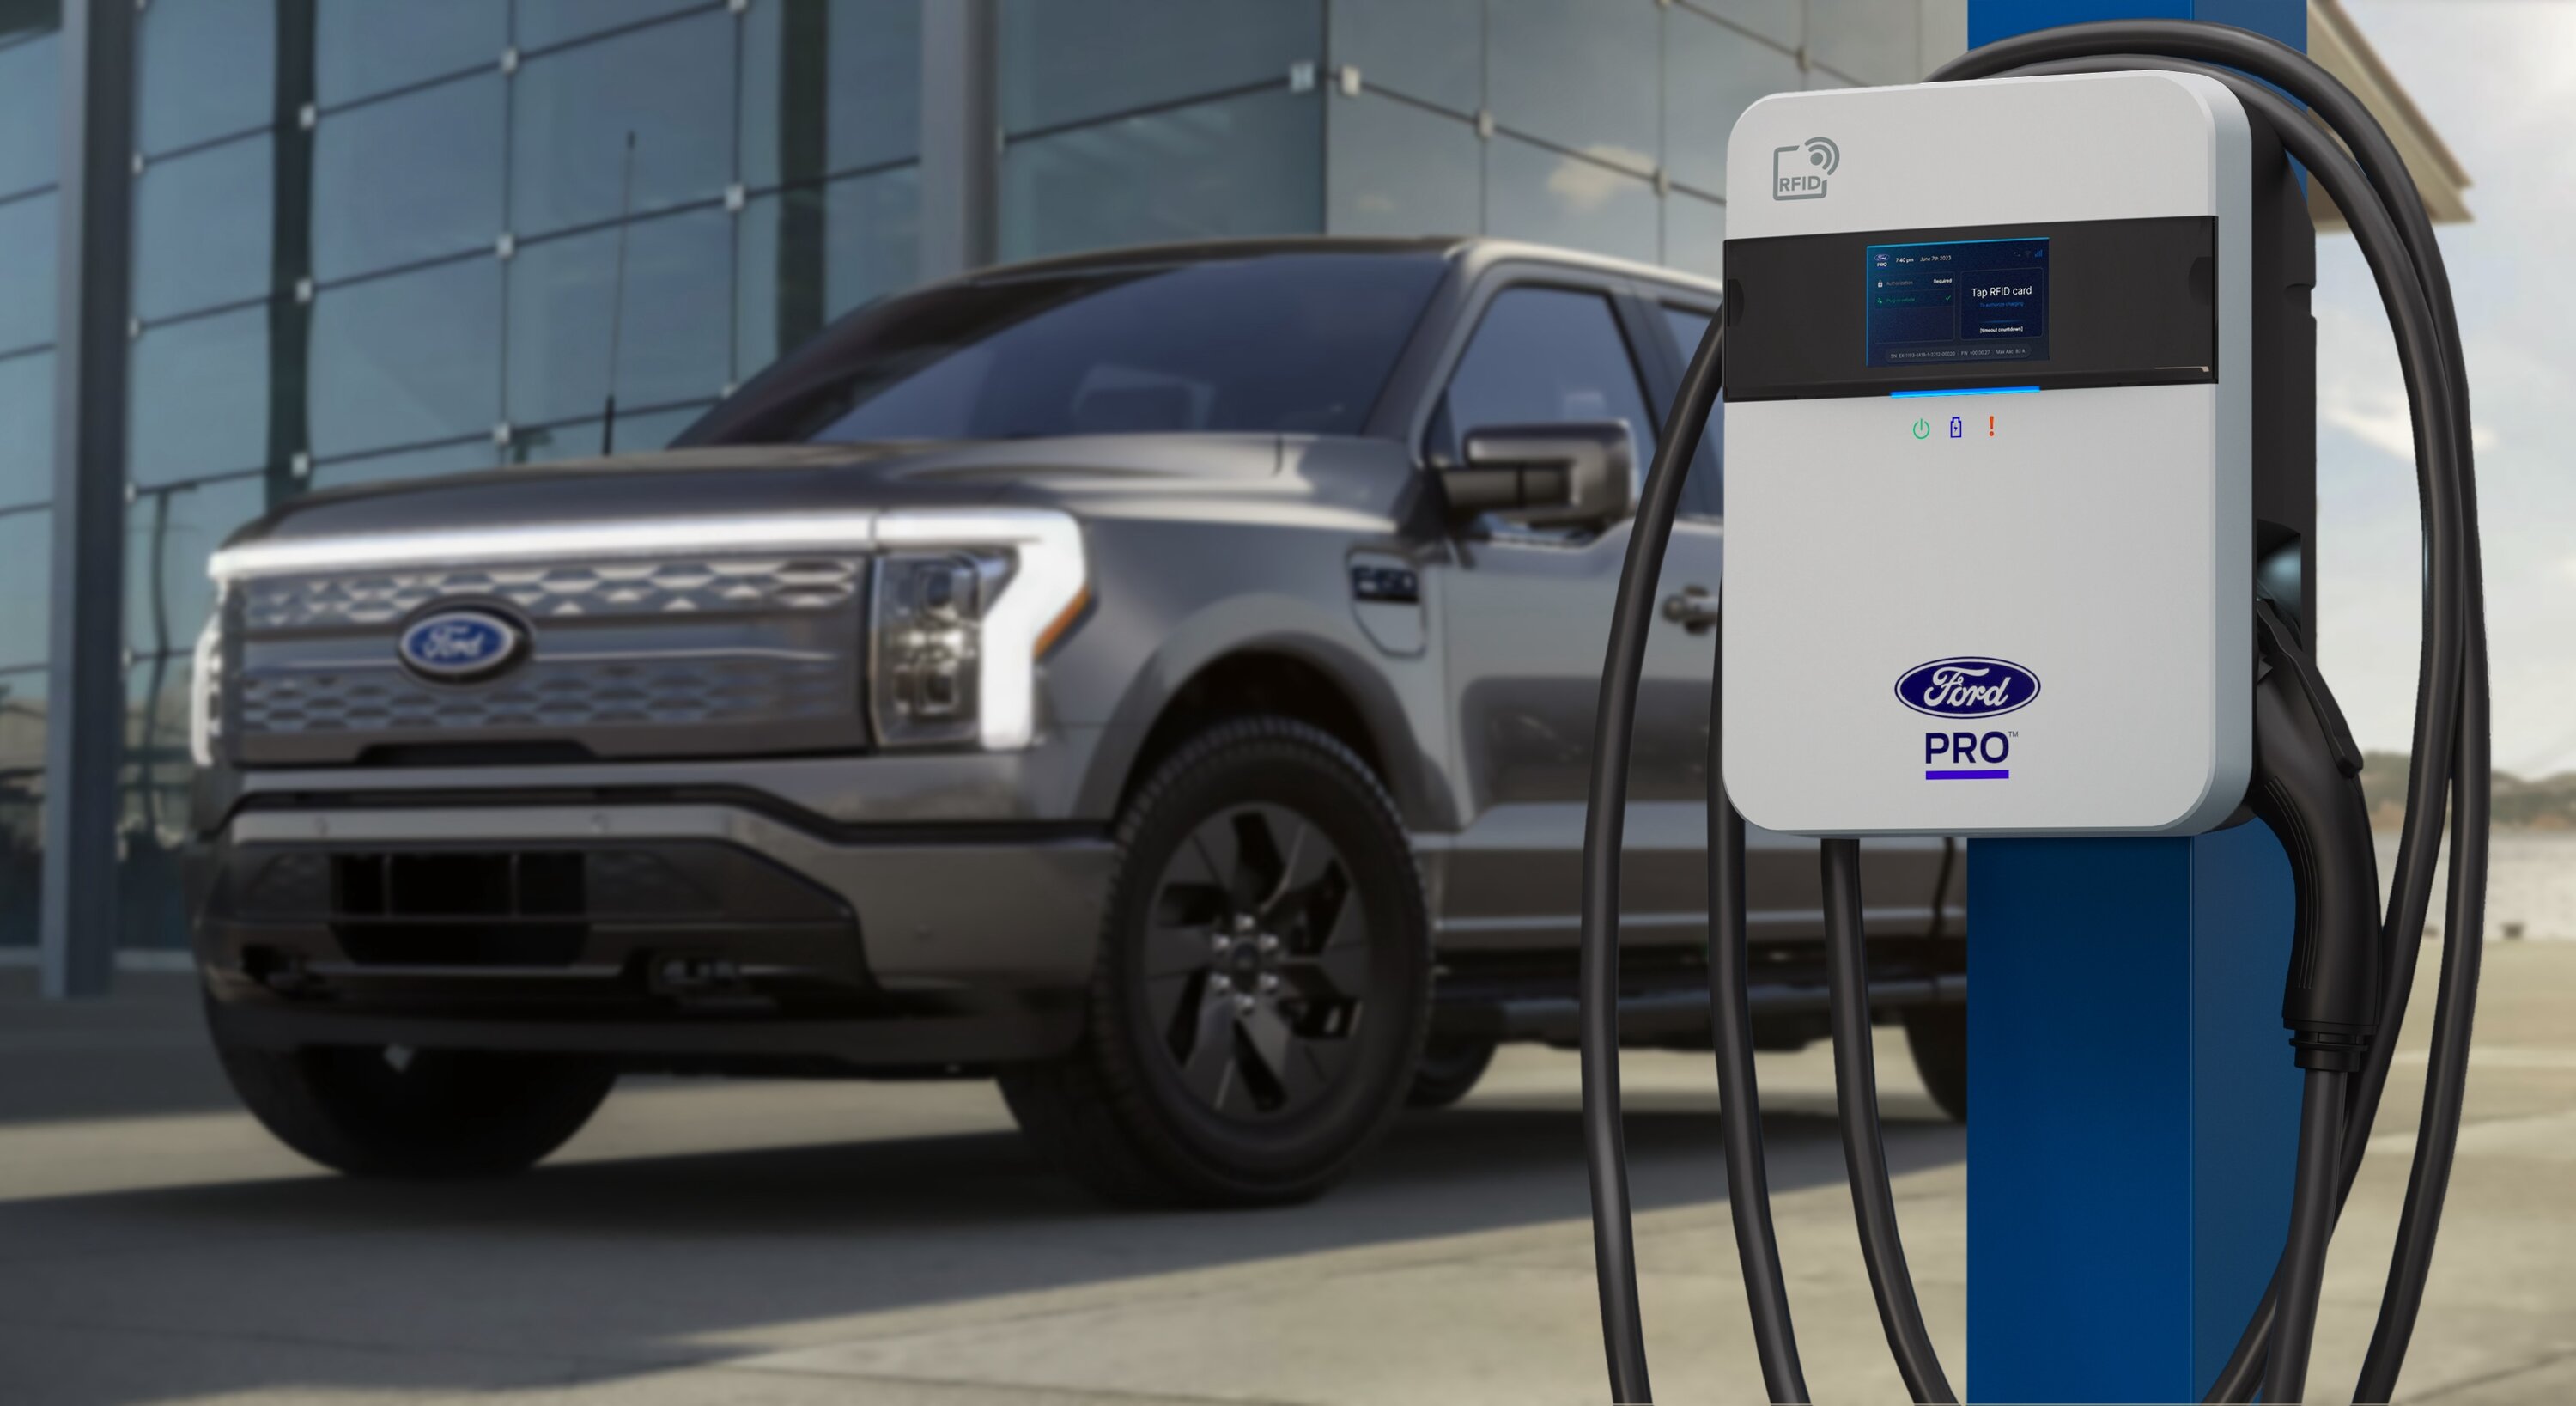 Ford F-150 Lightning Ford Pro and Xcel Energy Aim to Install 30,000 EV Charging Ports for Business Fleets by 2030 24_p702bev_80charger_02